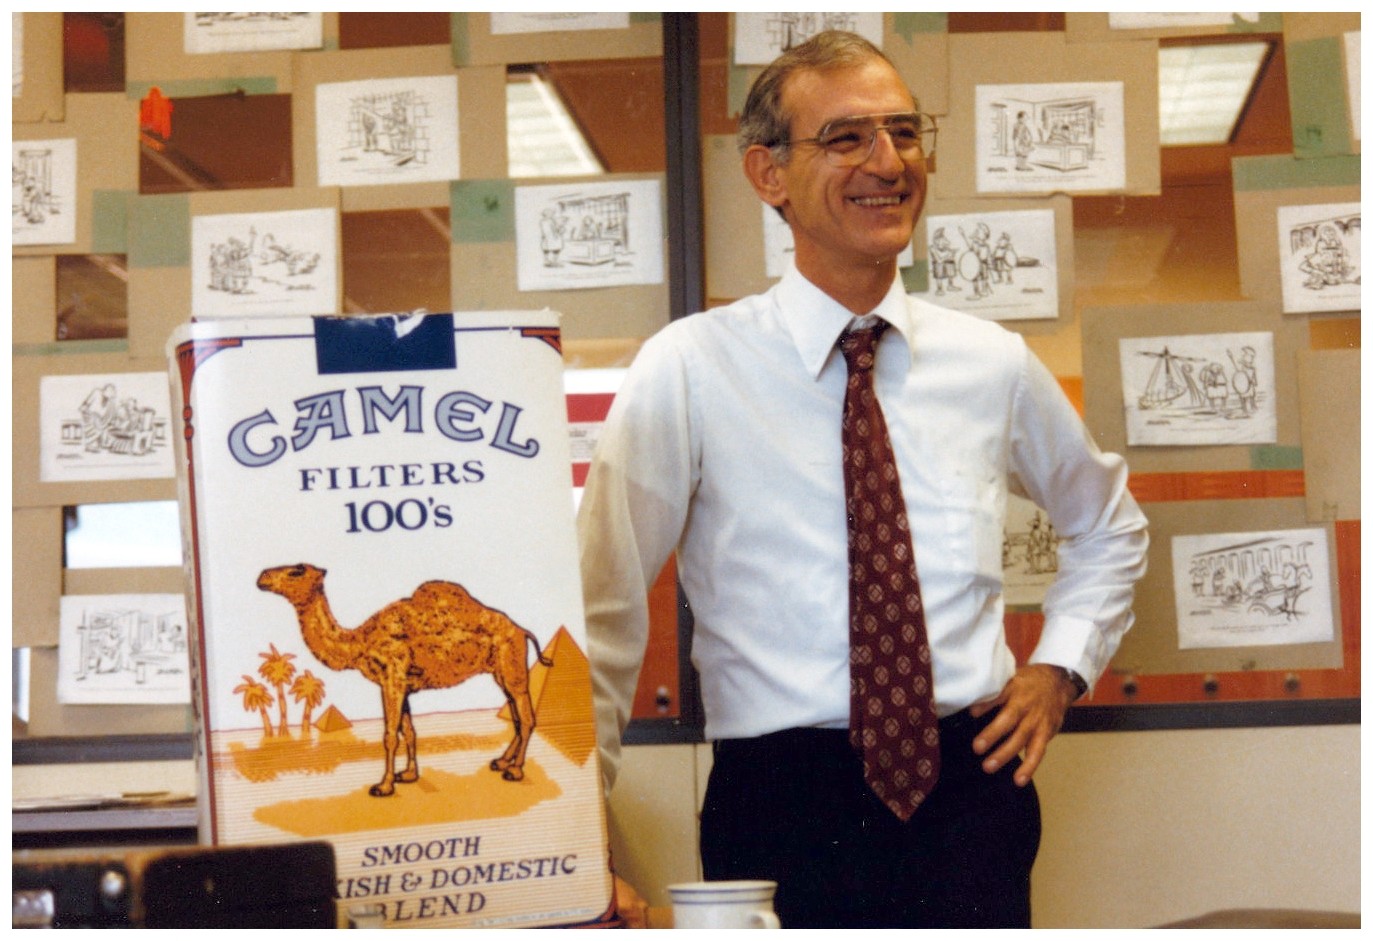 Saint Paul Central history teacher Richard Demers standing in his classroom with a giant pack of Camel cigarettes, smiling while wearing a white dress shirt, red tie and dark pants